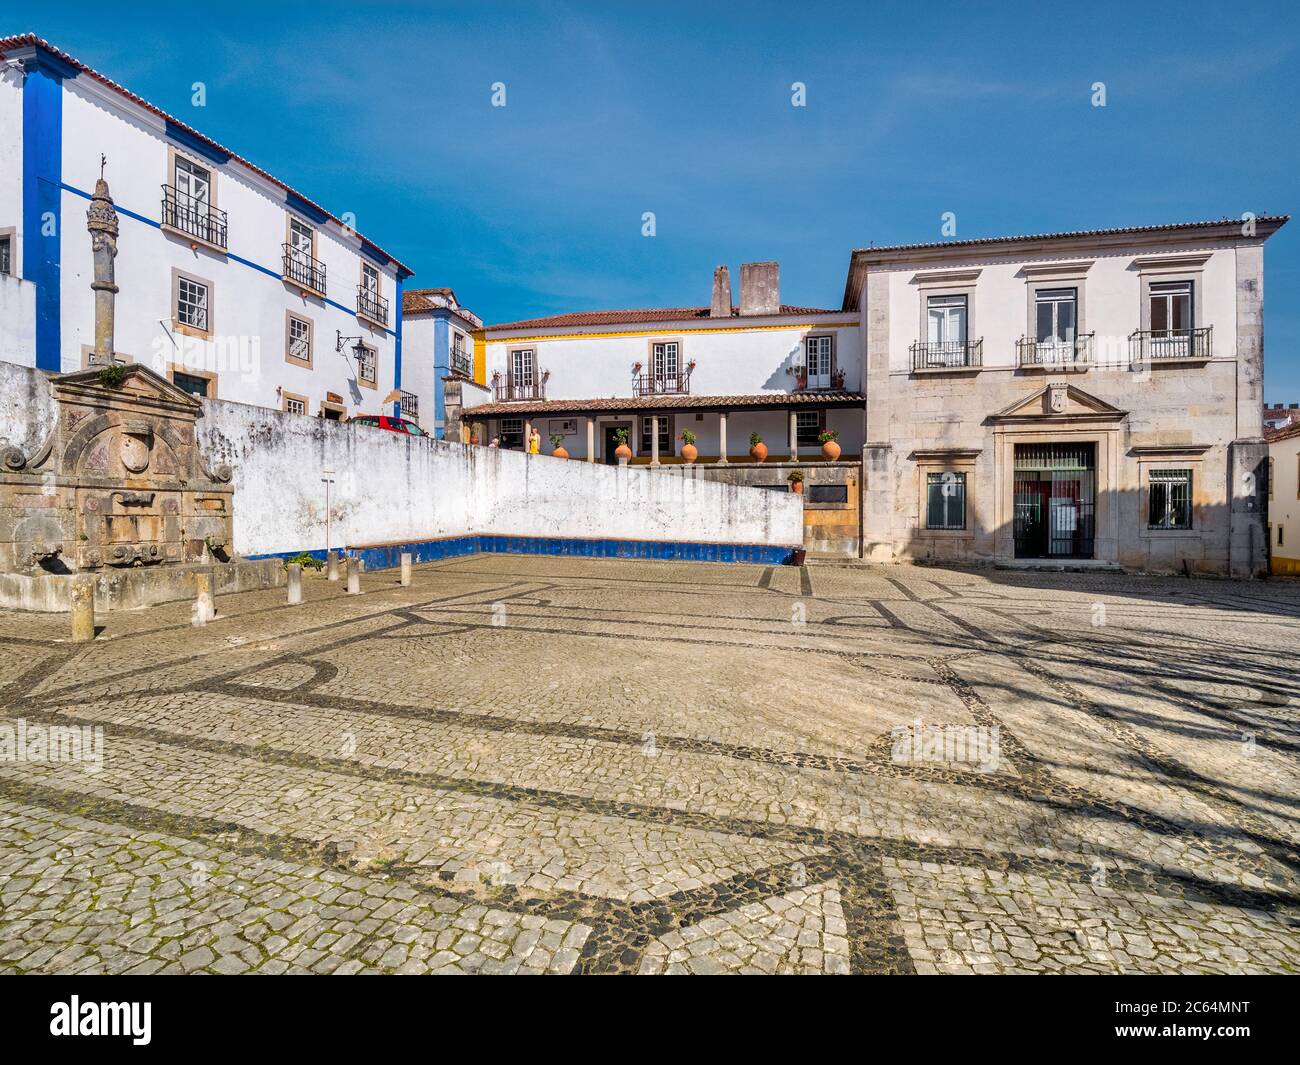 11 March 2020: Obidos, Portugal - The main square in the walled town of Obidos, with the Pelourinho or Pillory on the left. Stock Photo